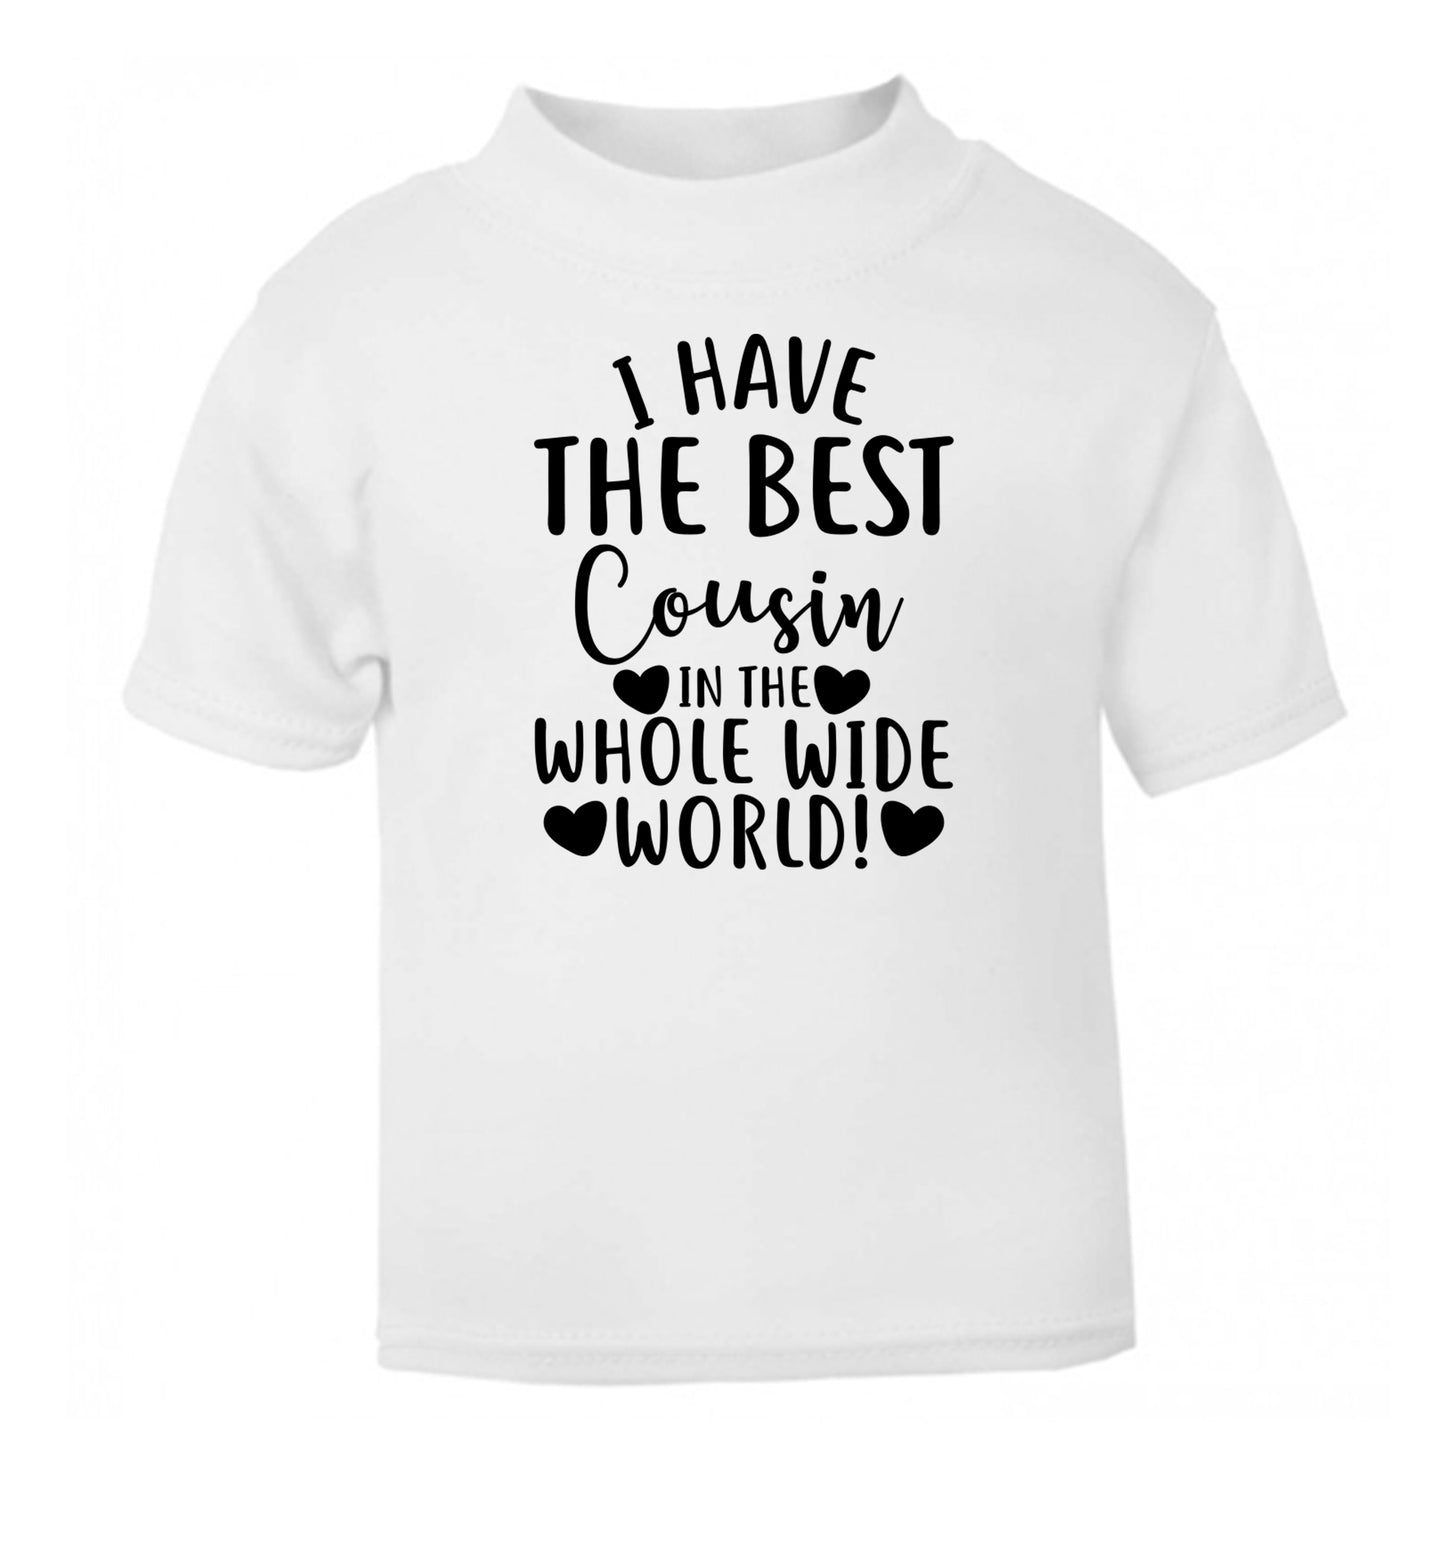 I have the best cousin in the whole wide world! white Baby Toddler Tshirt 2 Years